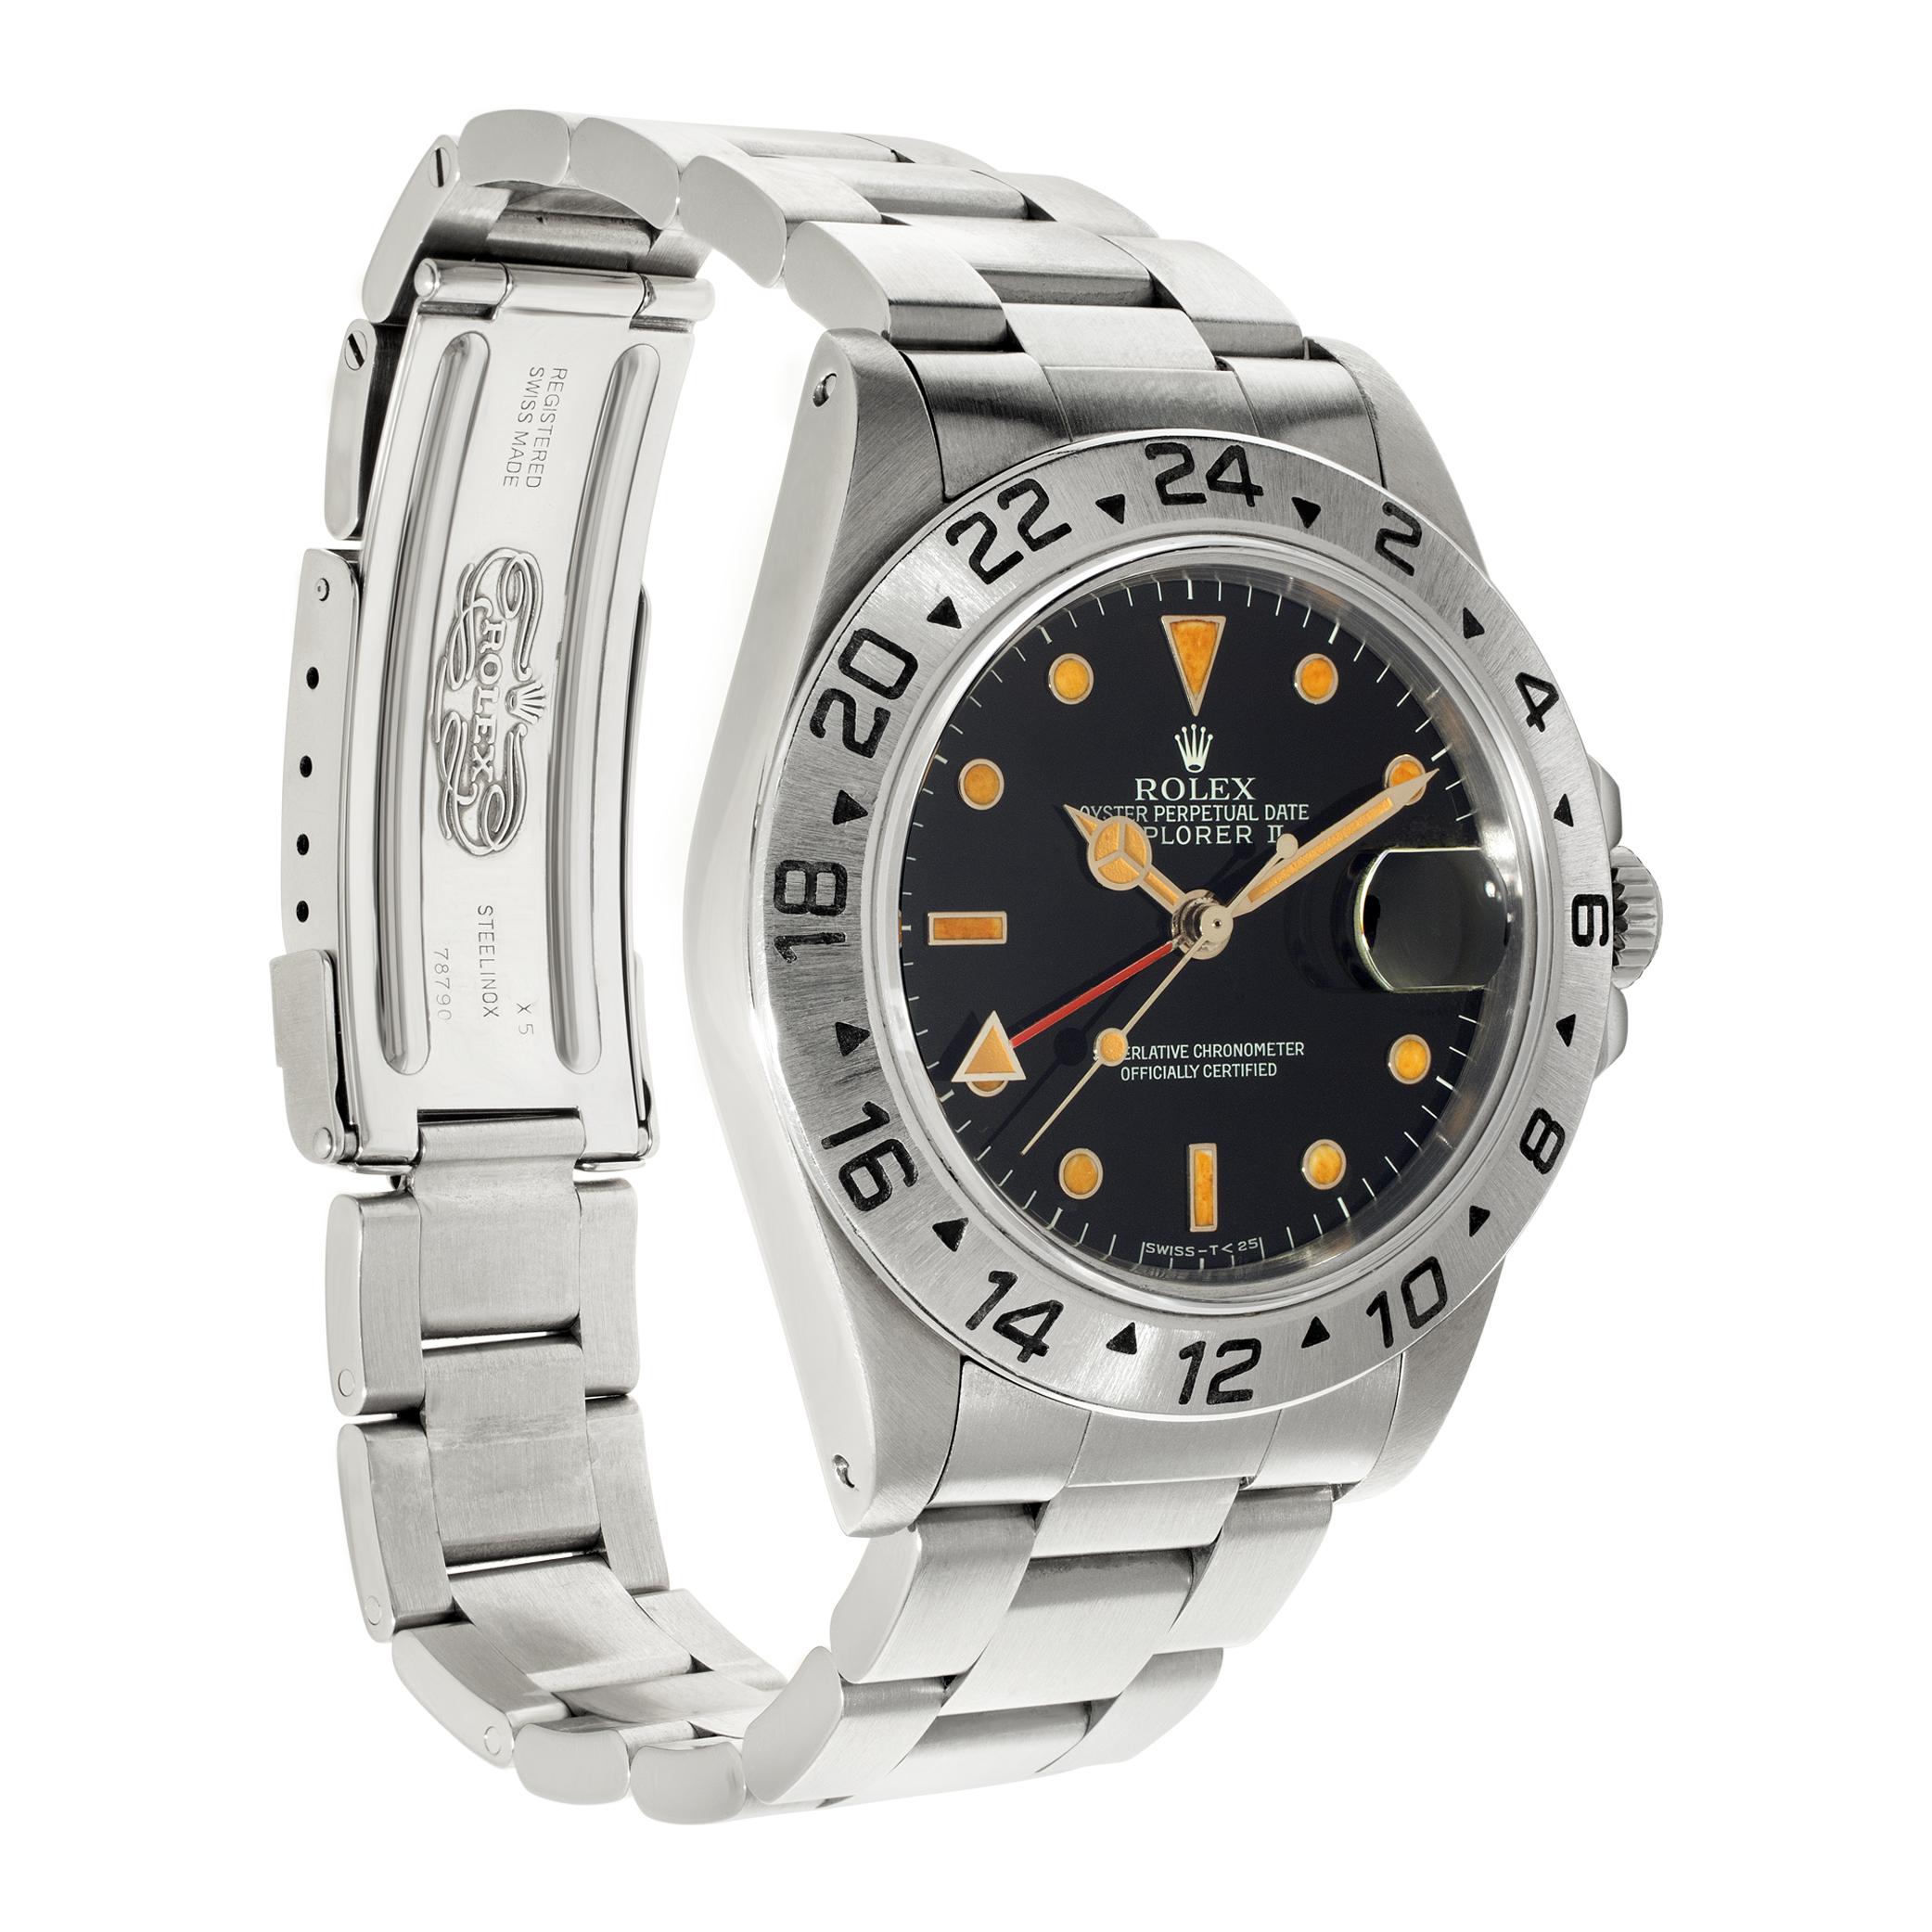 Rolex Explorer II stainless steel Automatic Wristwatch Ref 16550 In Excellent Condition For Sale In Surfside, FL